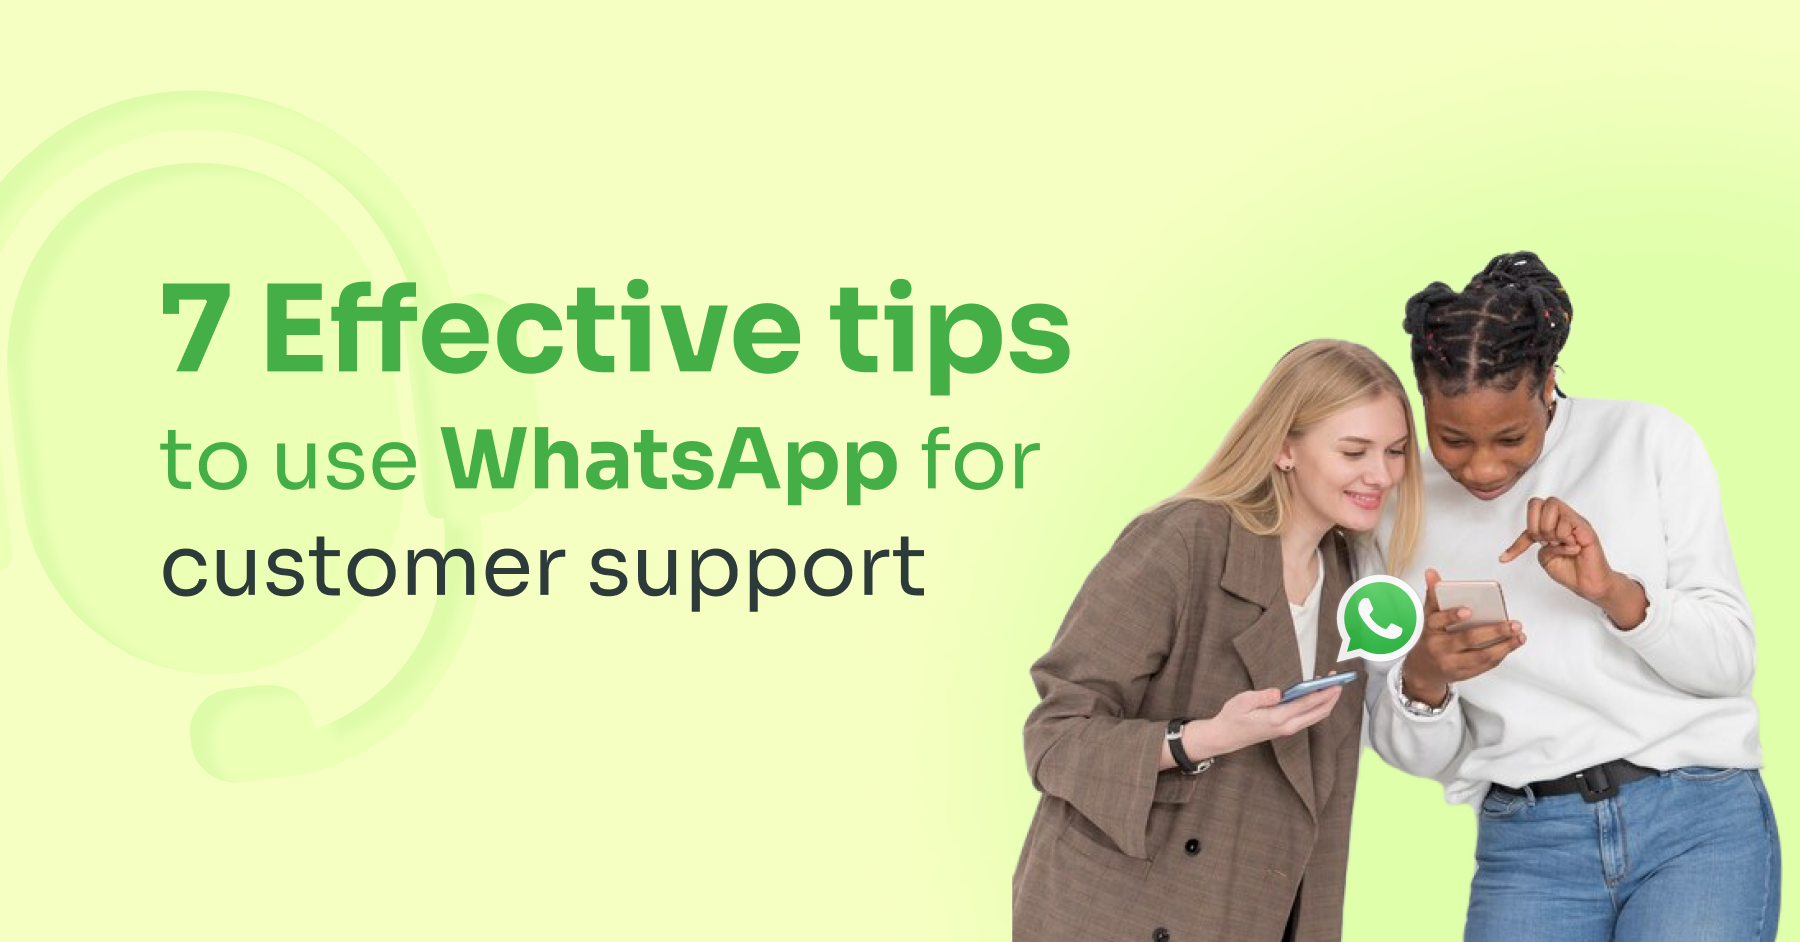 7 effective tips to use WhatsApp for customer support